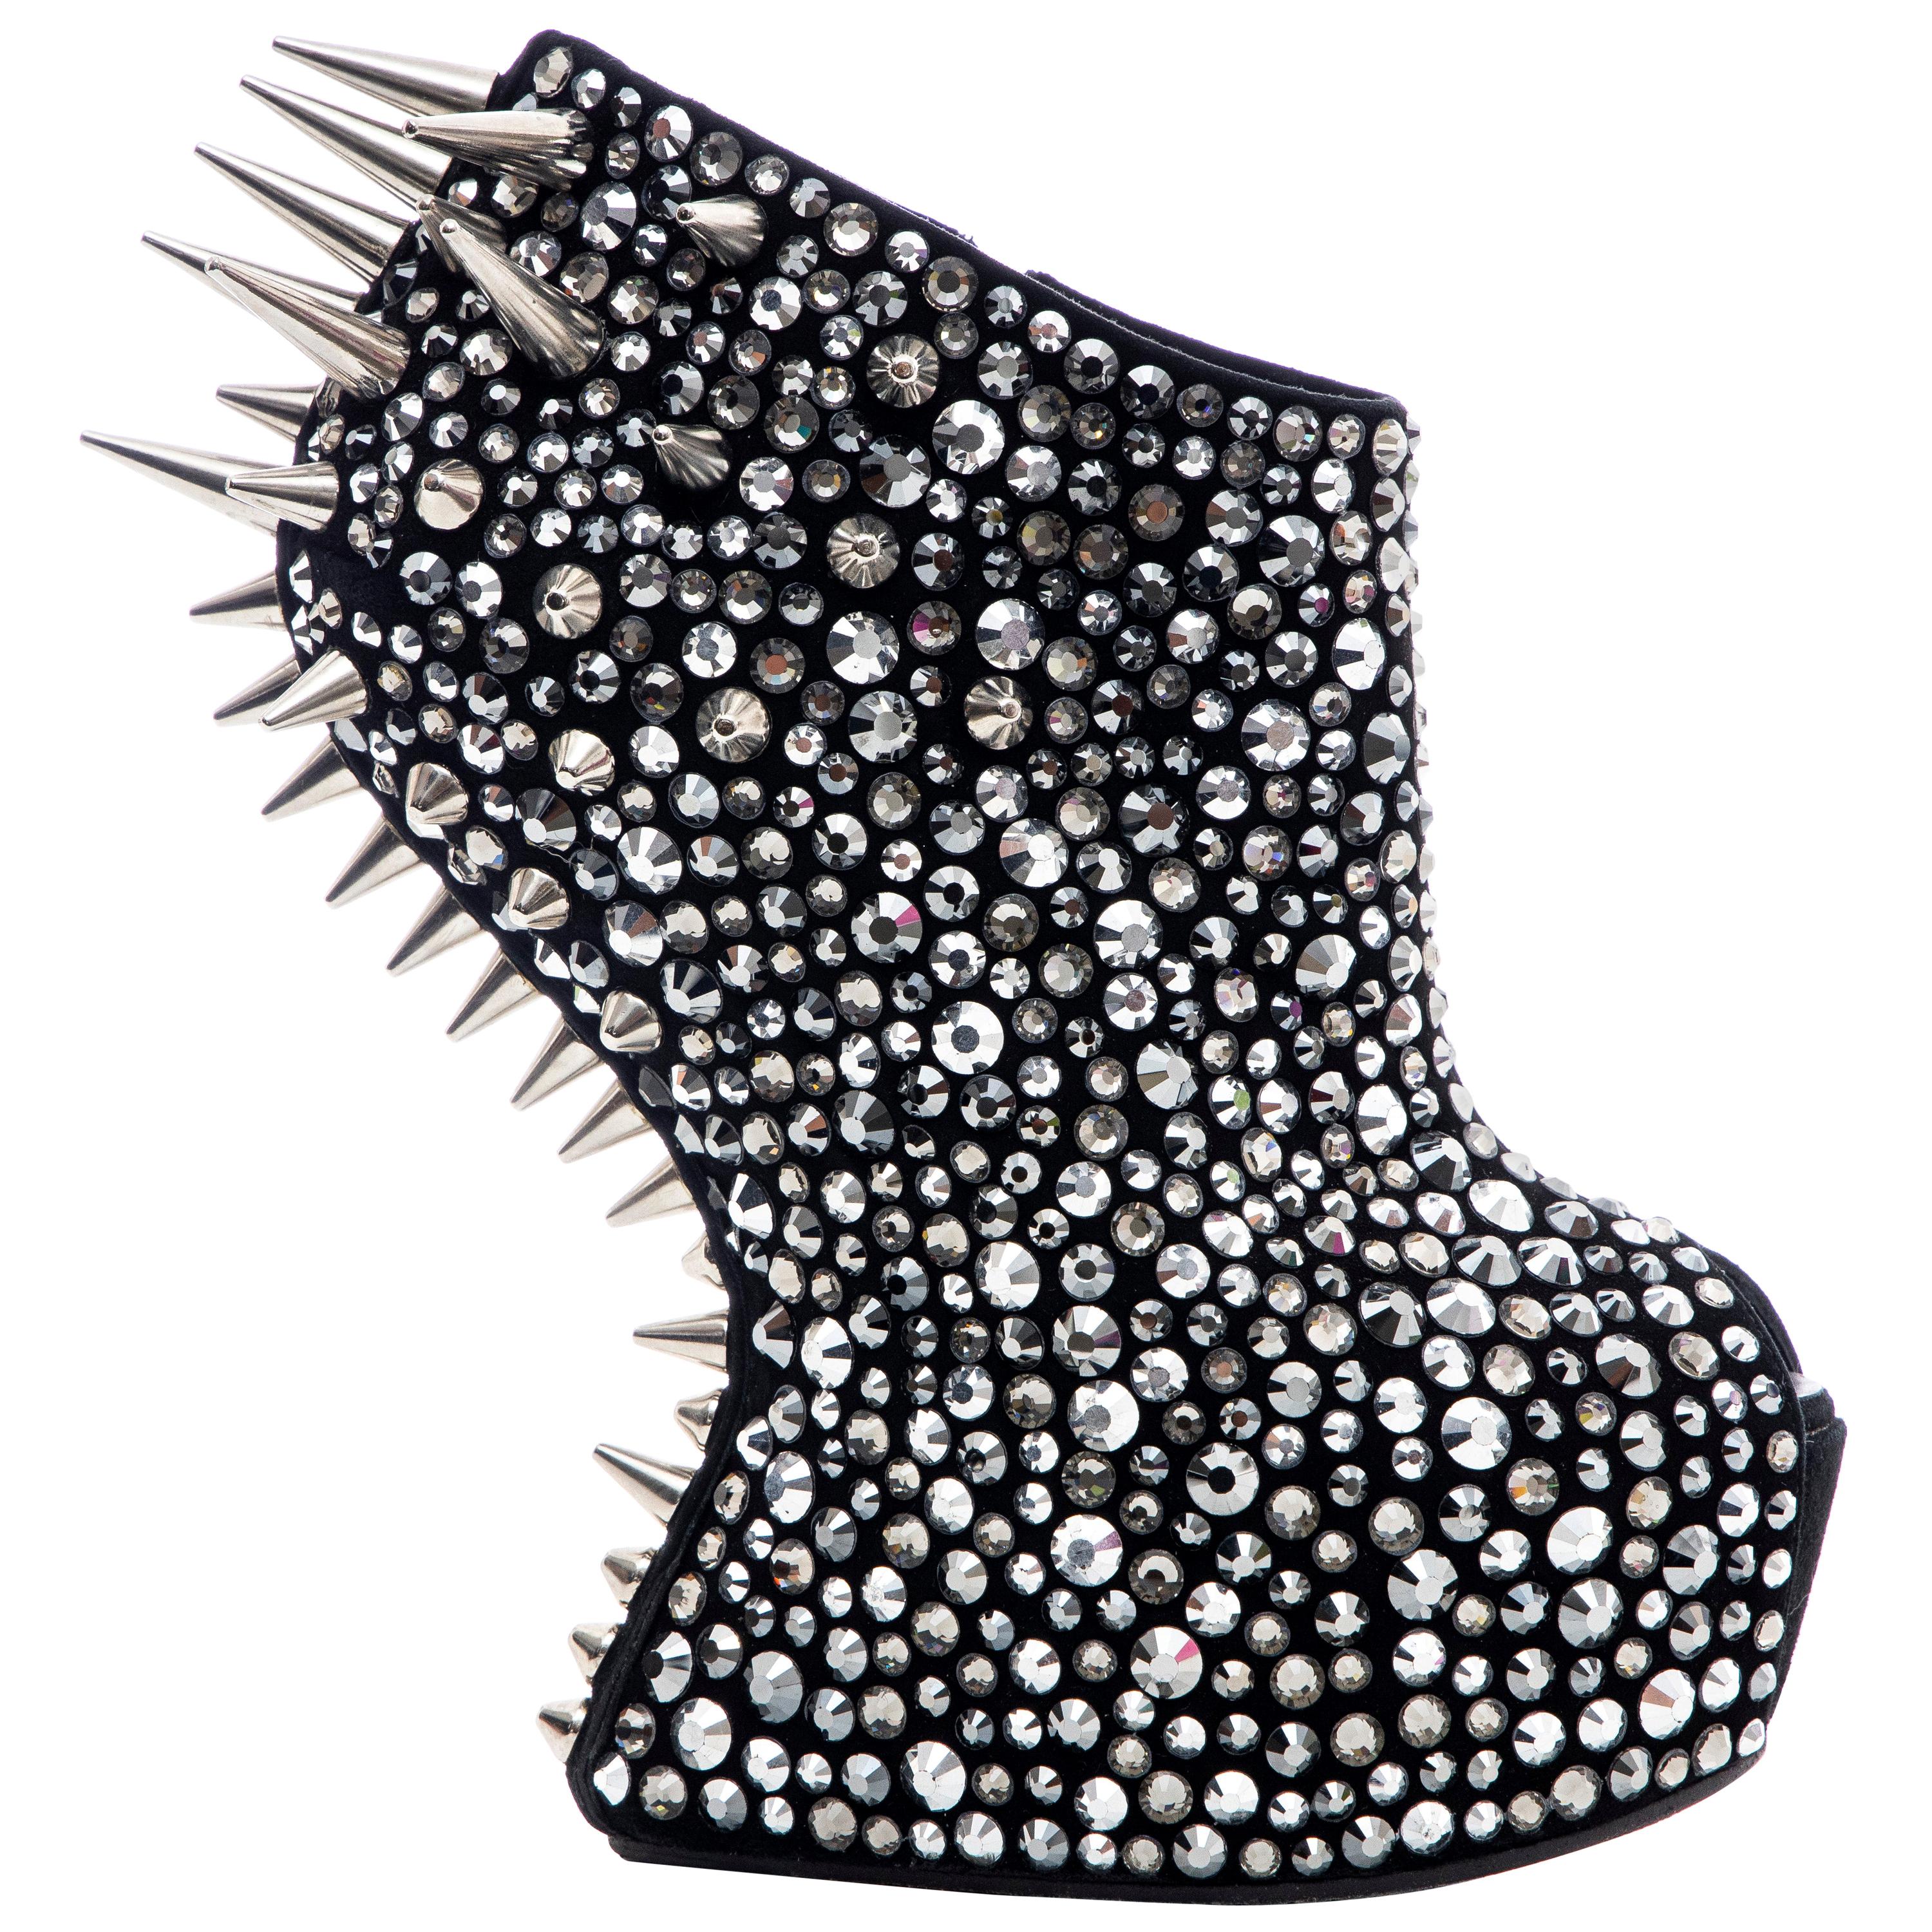 Guiseppe Zanotti Black Suede & Silver Spikes Embellished Wedges, Fall 2012